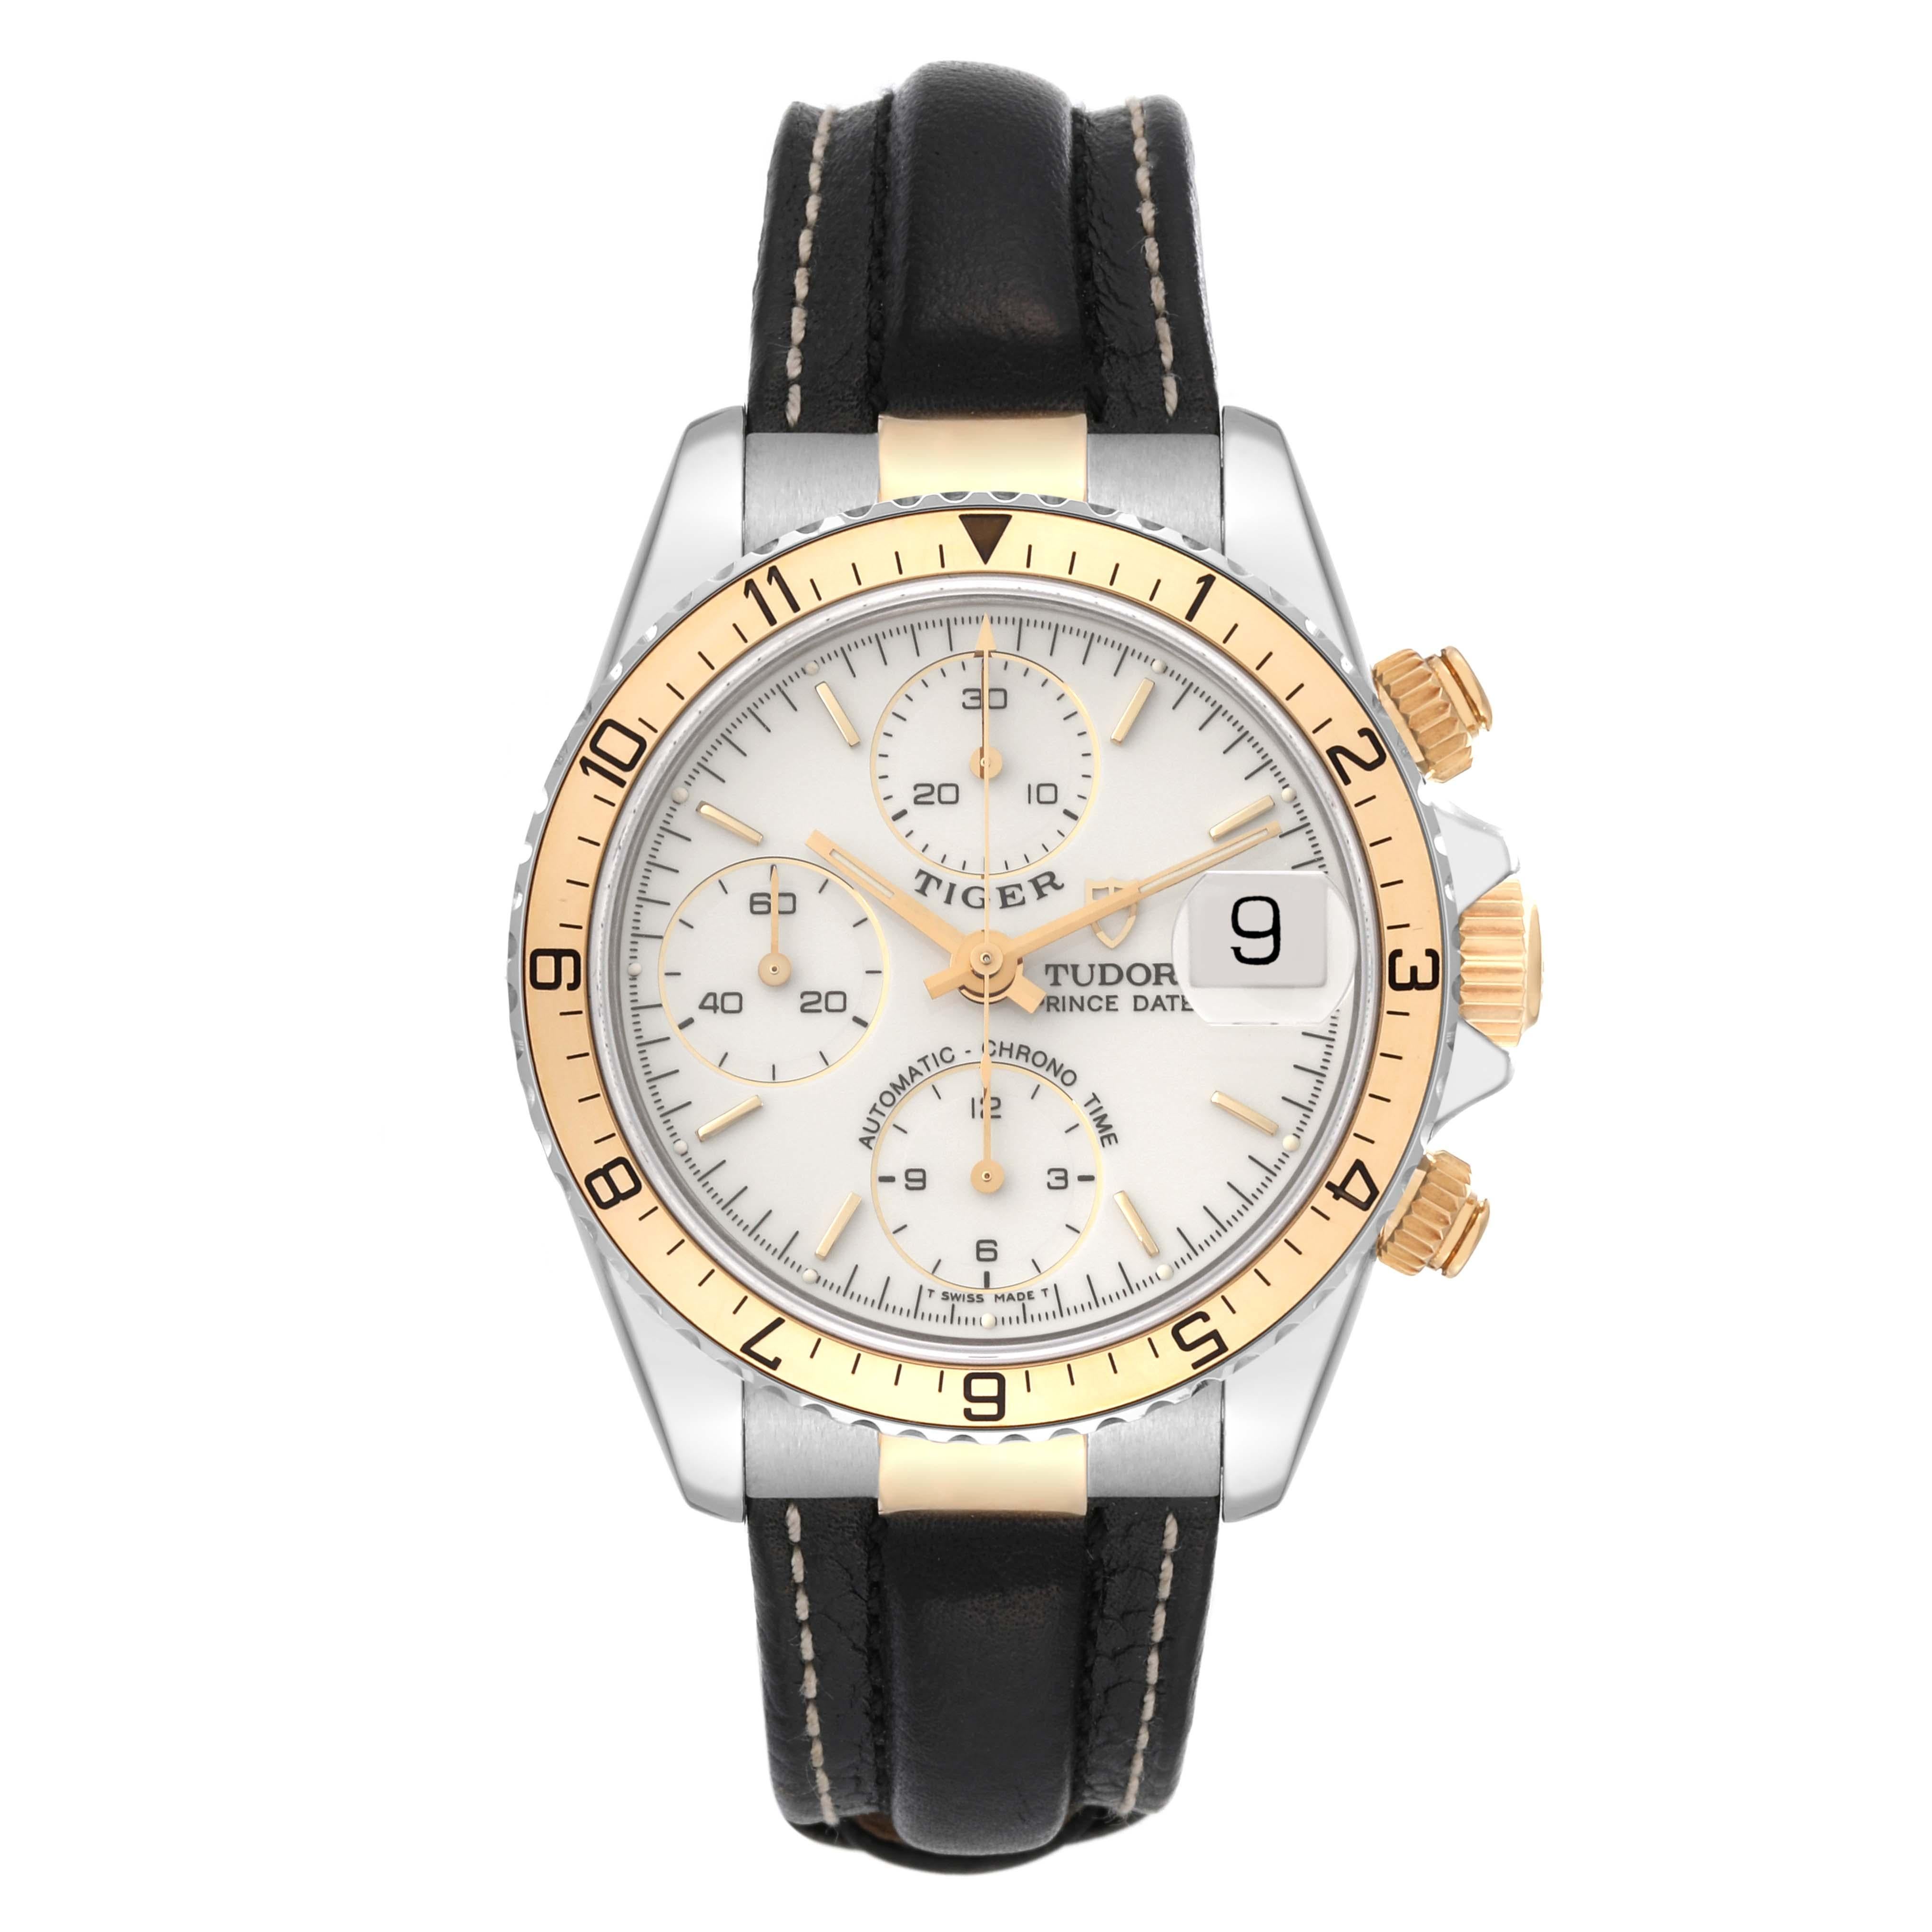 Tudor Tiger Prince Date Steel Yellow Gold Mens Watch 79273 Box Papers. Automatic self-winding movement with chronograph function. Stainless steel oyster case 40.0 mm in diameter. Tudor logo on an 18k yellow gold crown. Stainless steel bidirectional